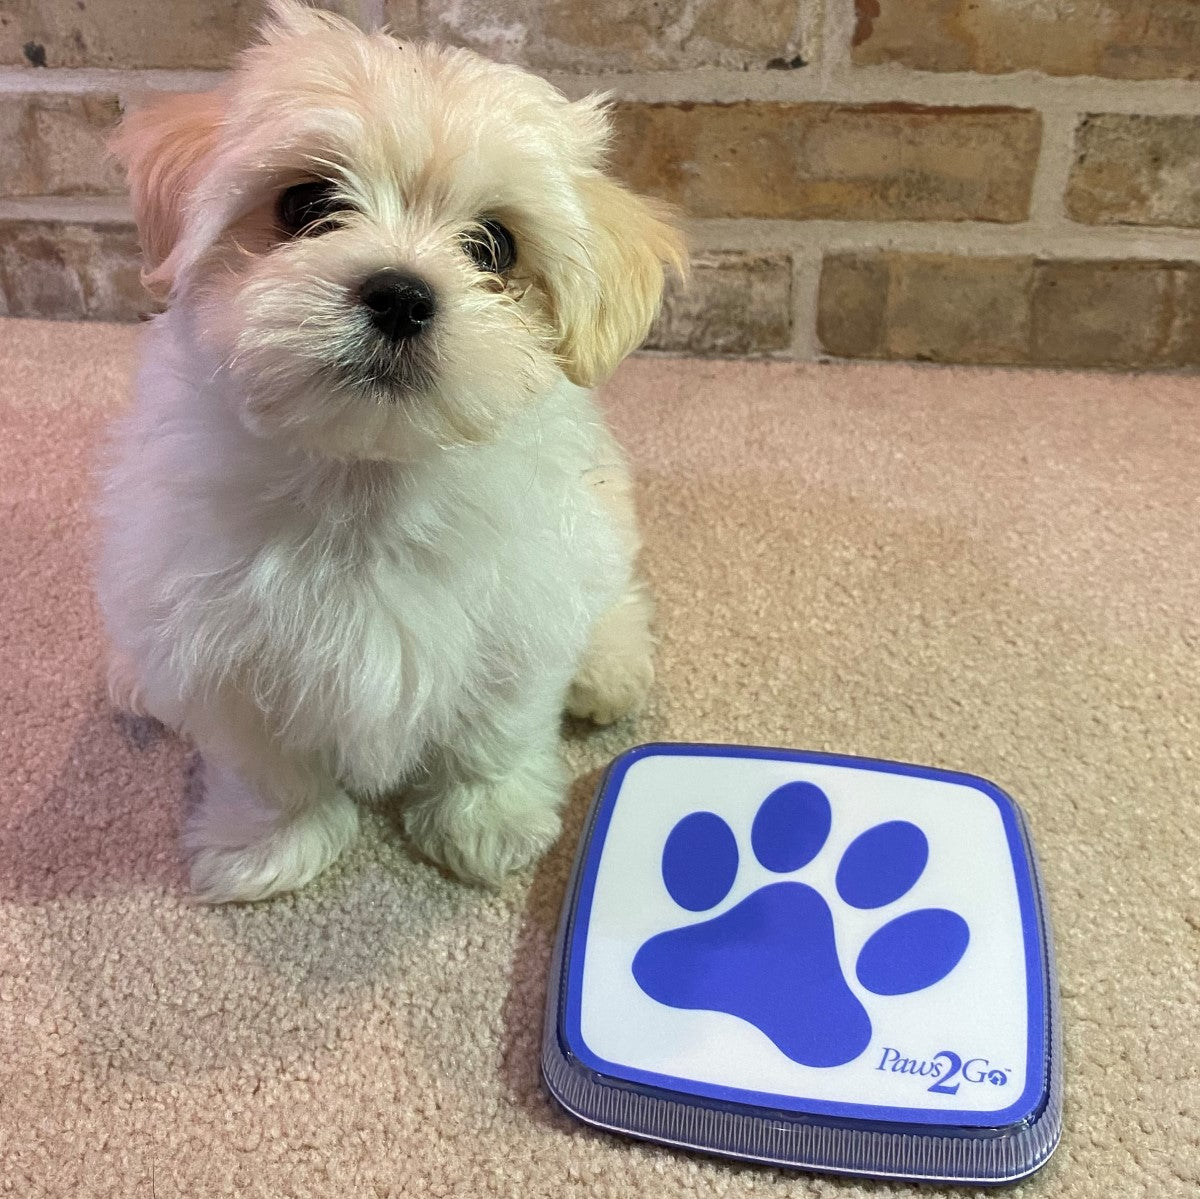 Dog sitting next to Paws2Go doggie doorbell used for housetraining